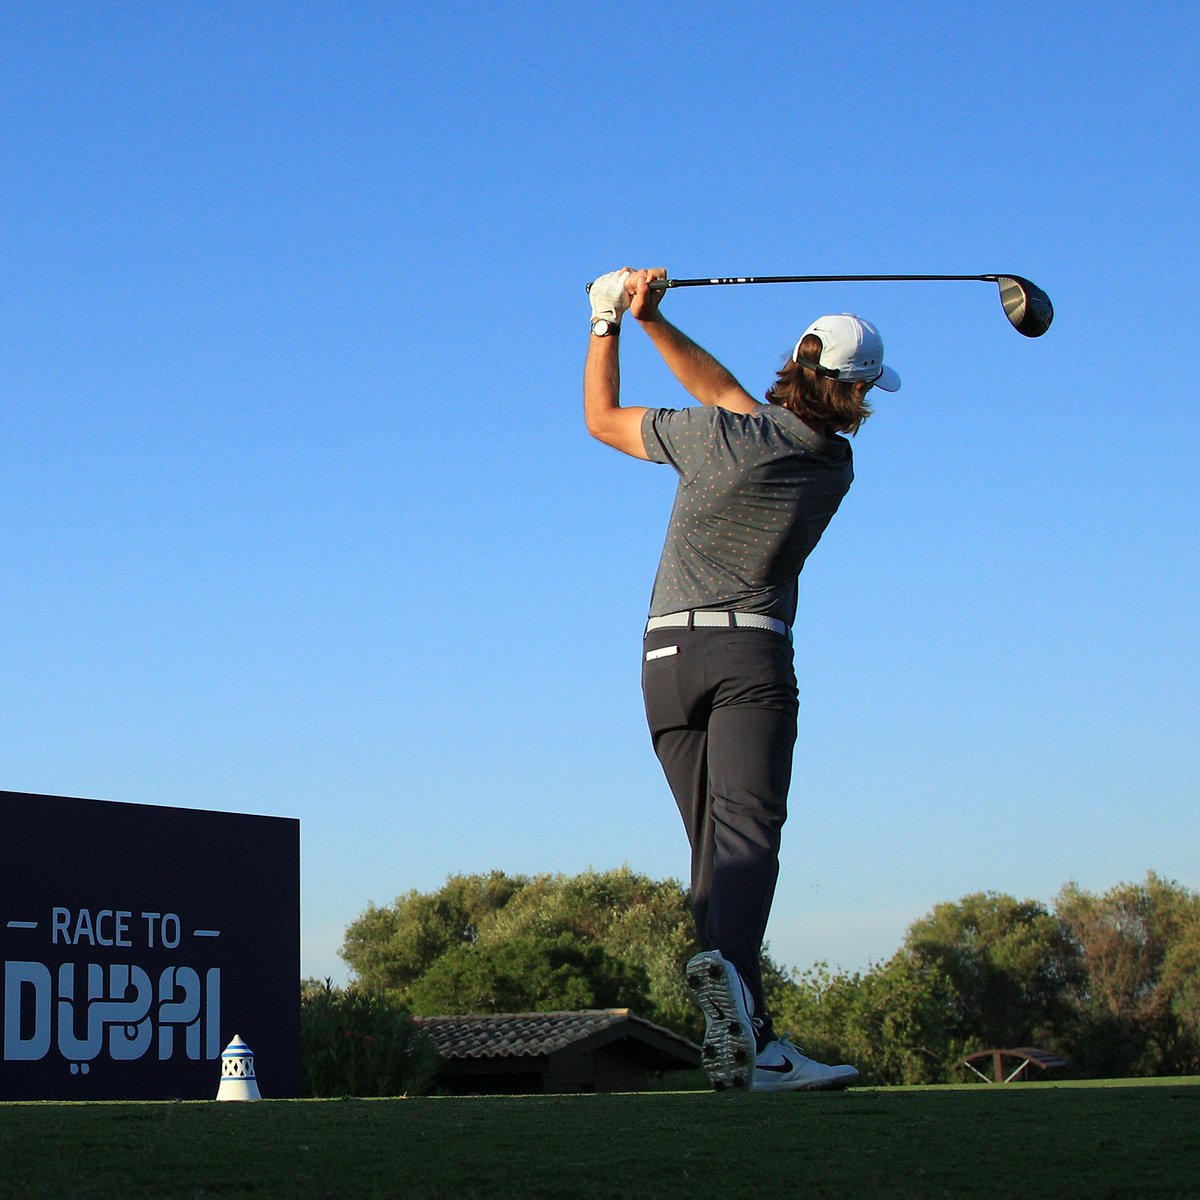 👀 World No.16 Tommy Fleetwood has a new driver in the bag 👀 He is the first big non-contracted player to stick @TitleistEurope's new TSi3 driver into the bag following its tour debut at the Portugal Masters this week.